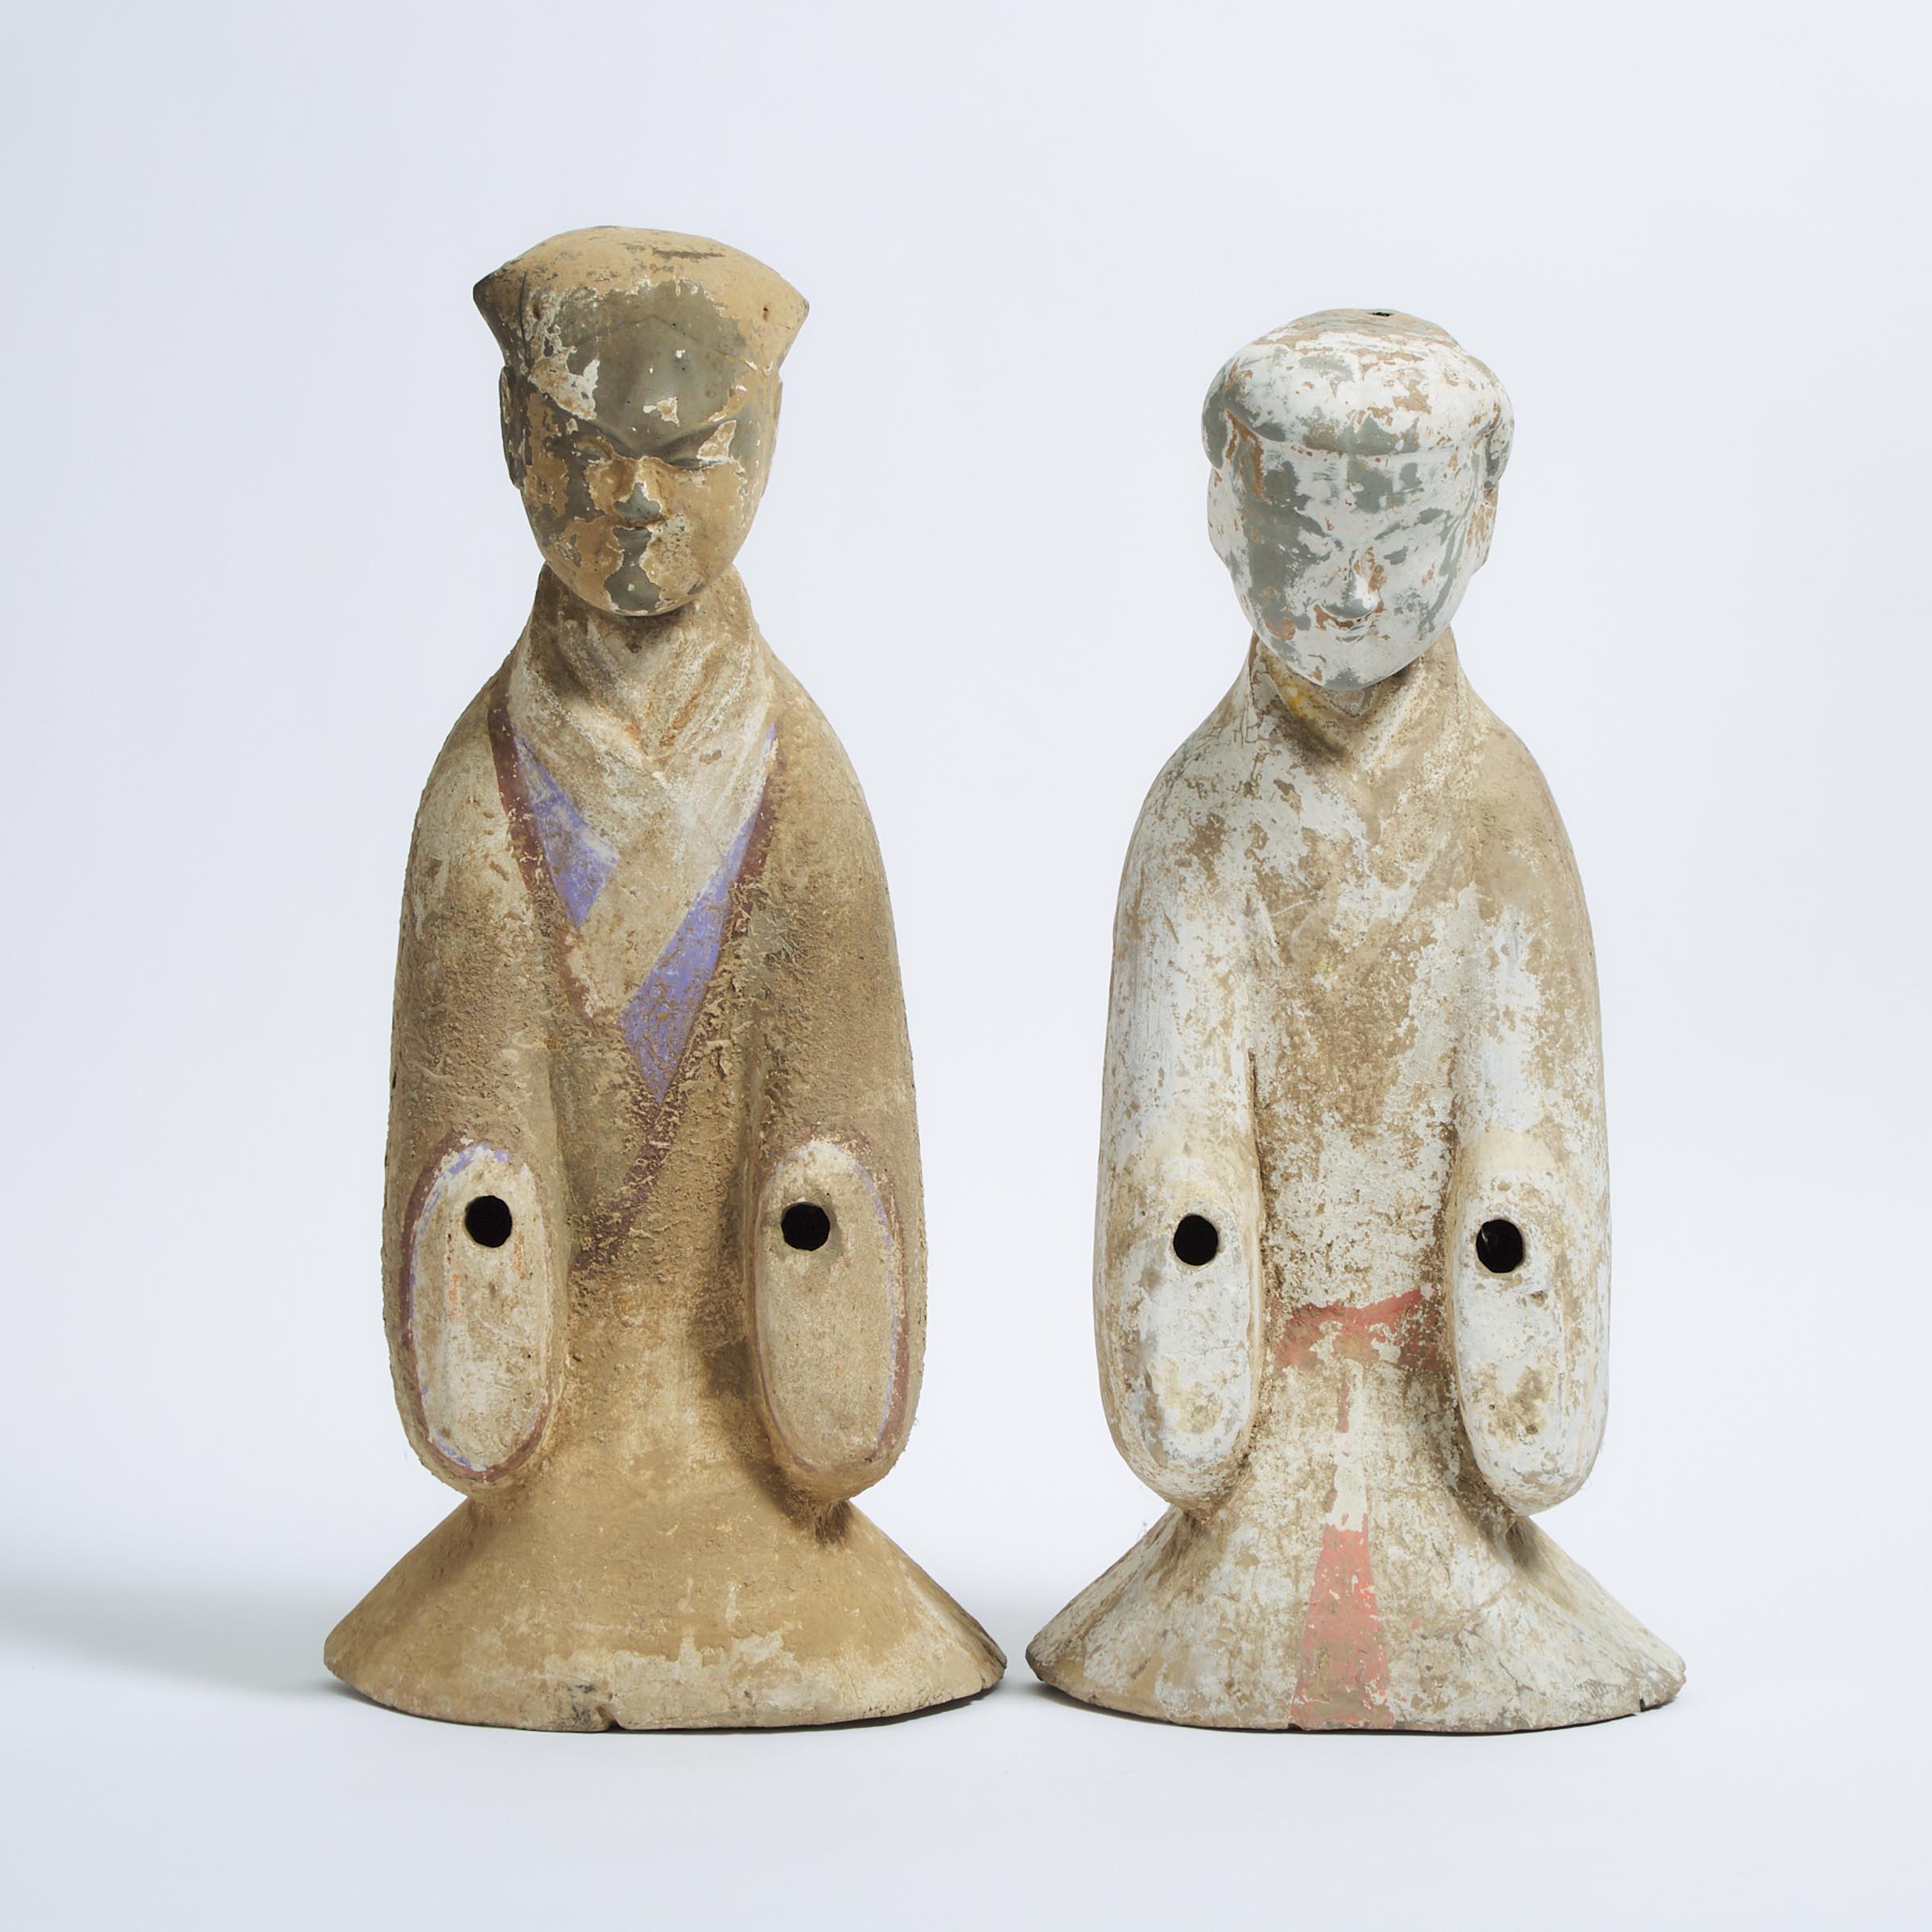 A Pair of Large Painted Pottery Figures of Attendants, Han Dynasty (206 BC - AD 220)